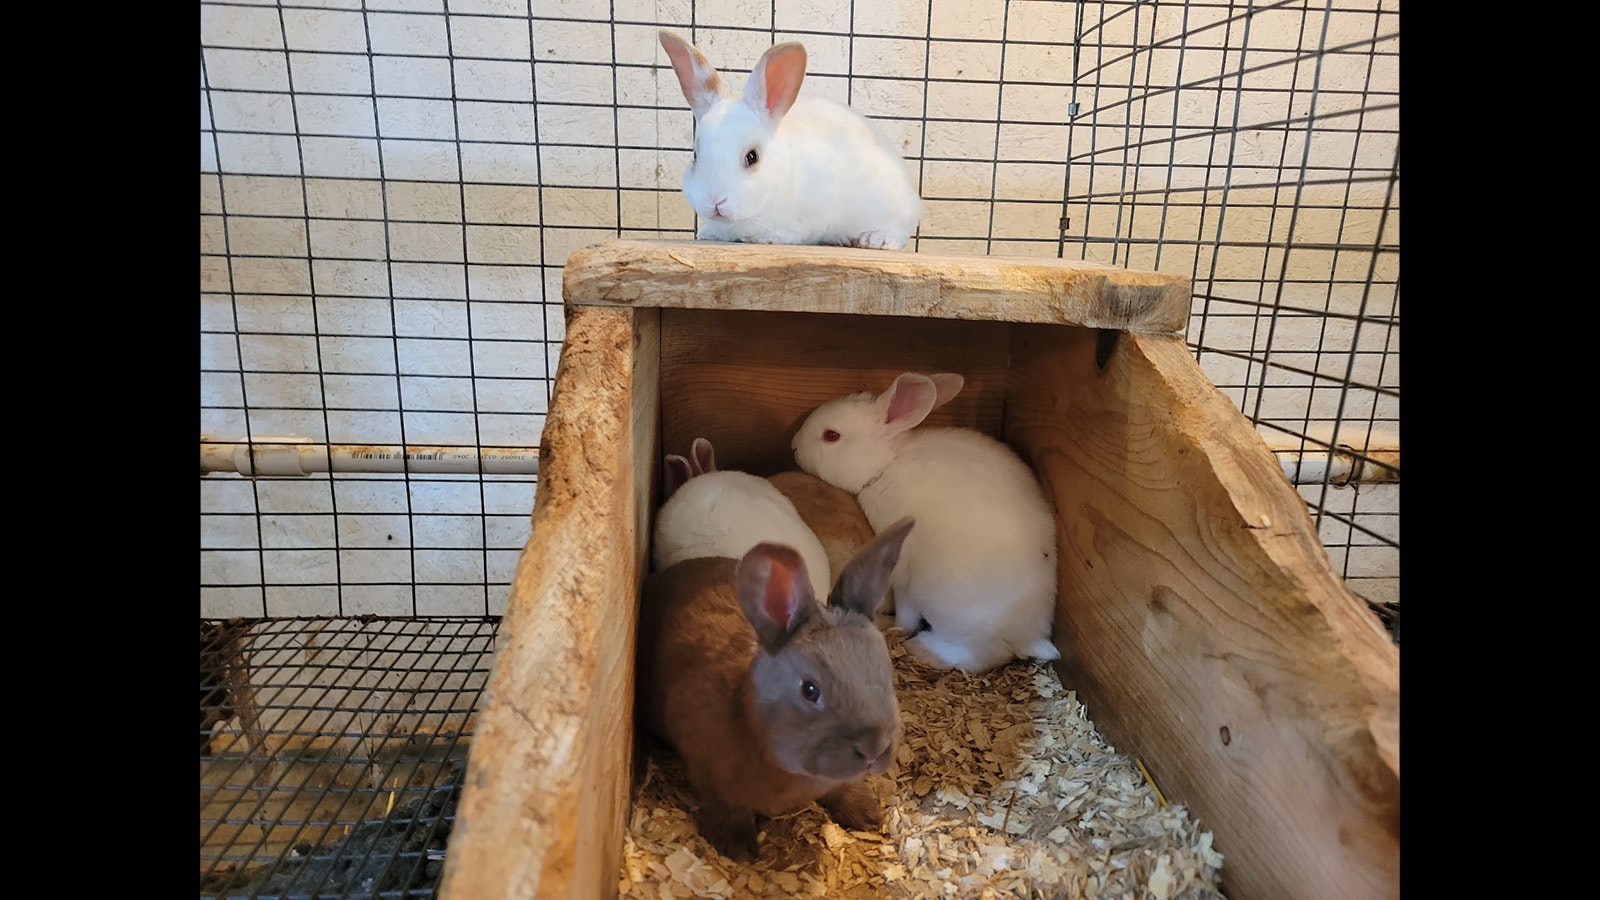 Broken Arrow Farm produces New Zealand, Californian and Rex rabbits. The rabbits are butchered and sold to a zoo in Rapid City, South Dakota.